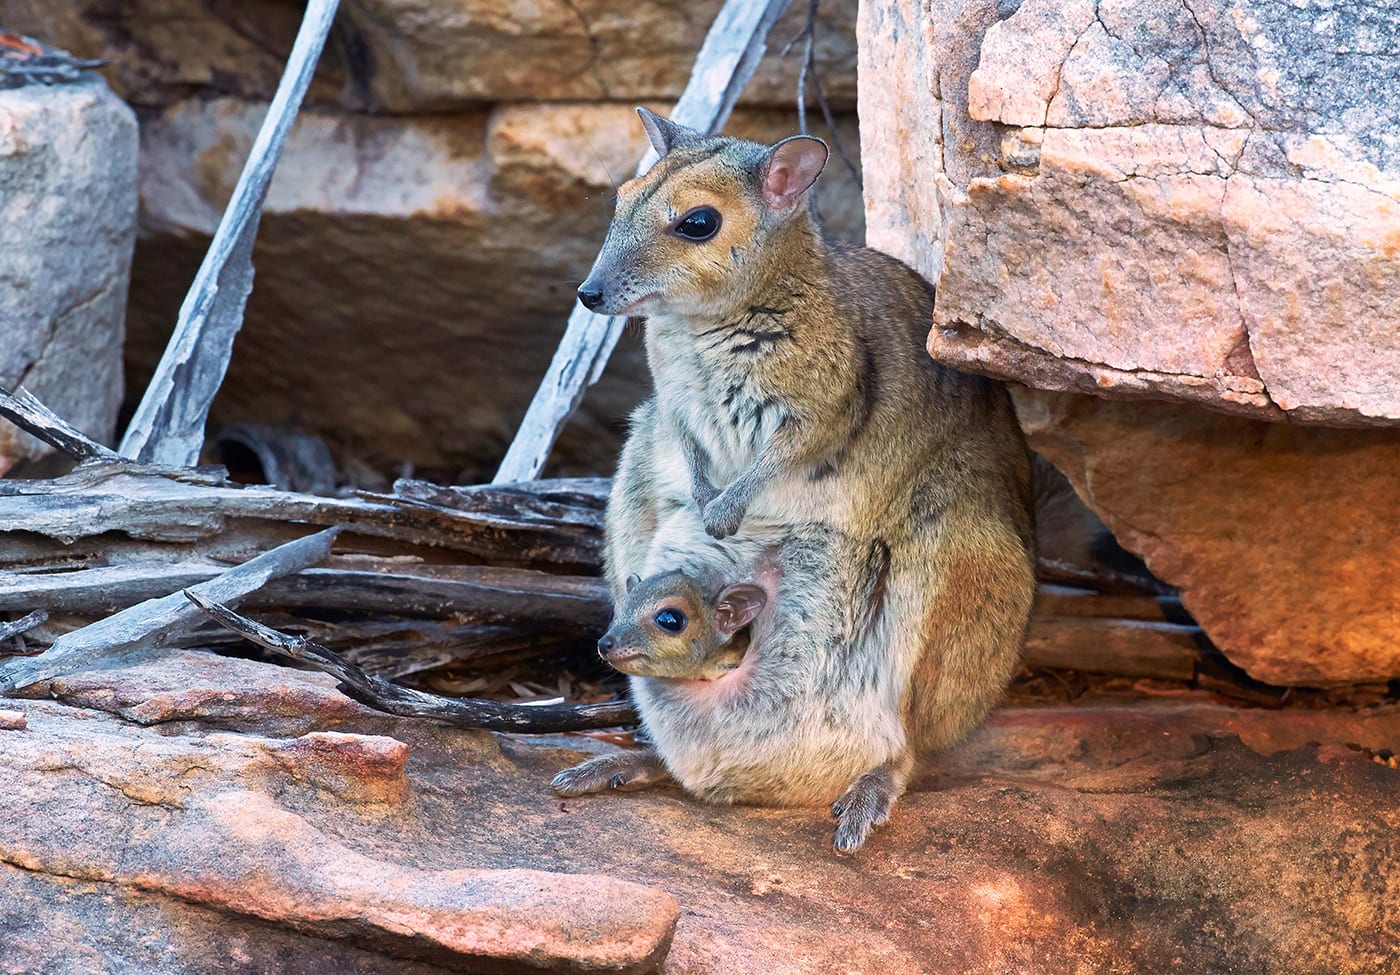 The Monjon is the smallest species of rock-wallaby. They are restricted to a small area of the Kimberley region and on nearby islands in the Bonaparte Archipelago.